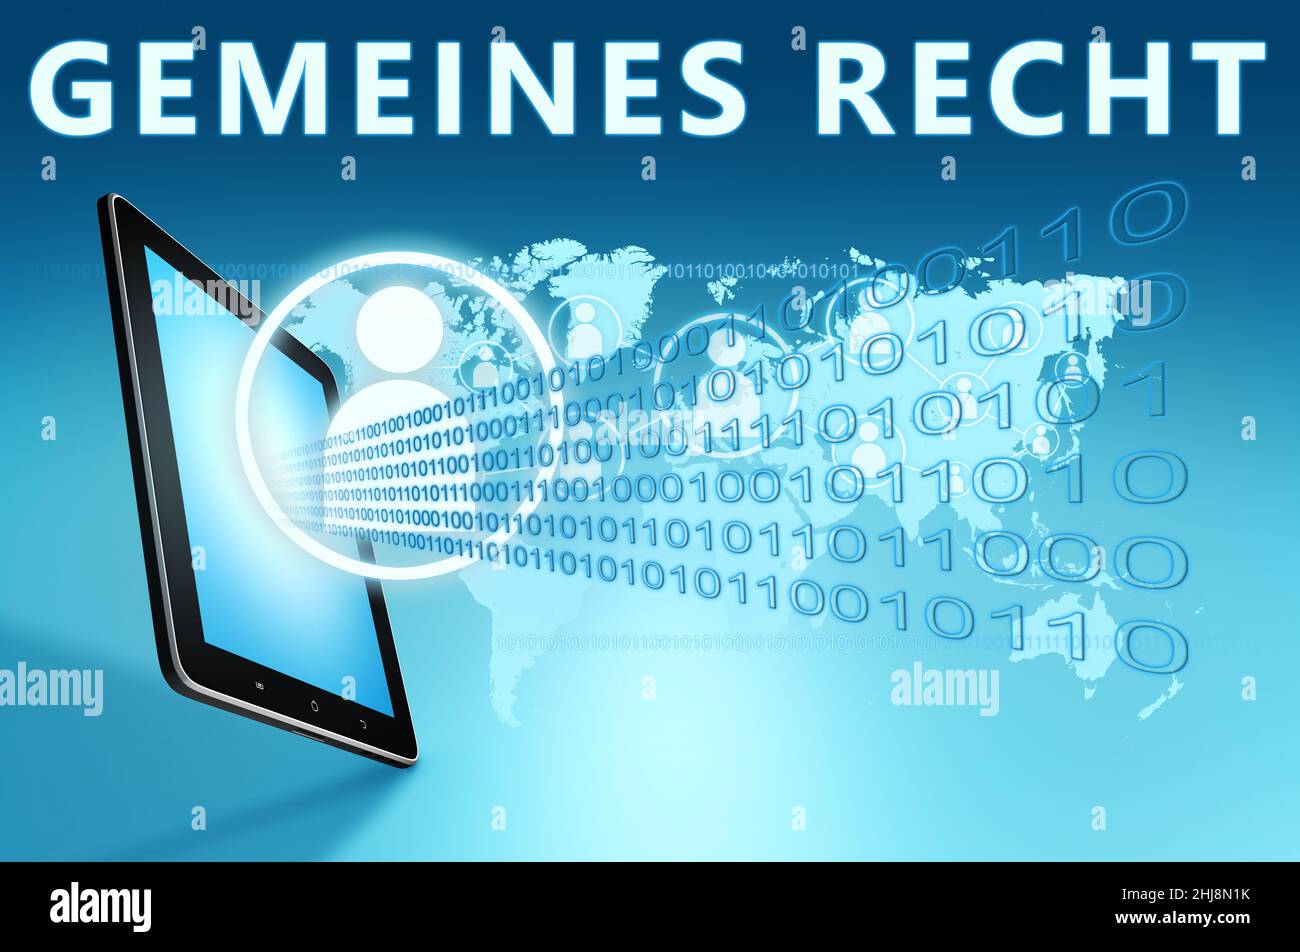 Gemeines Recht - german word for common right - text concept with tablet computer on blue wolrd map background - 3d render illustration. Stock Photo